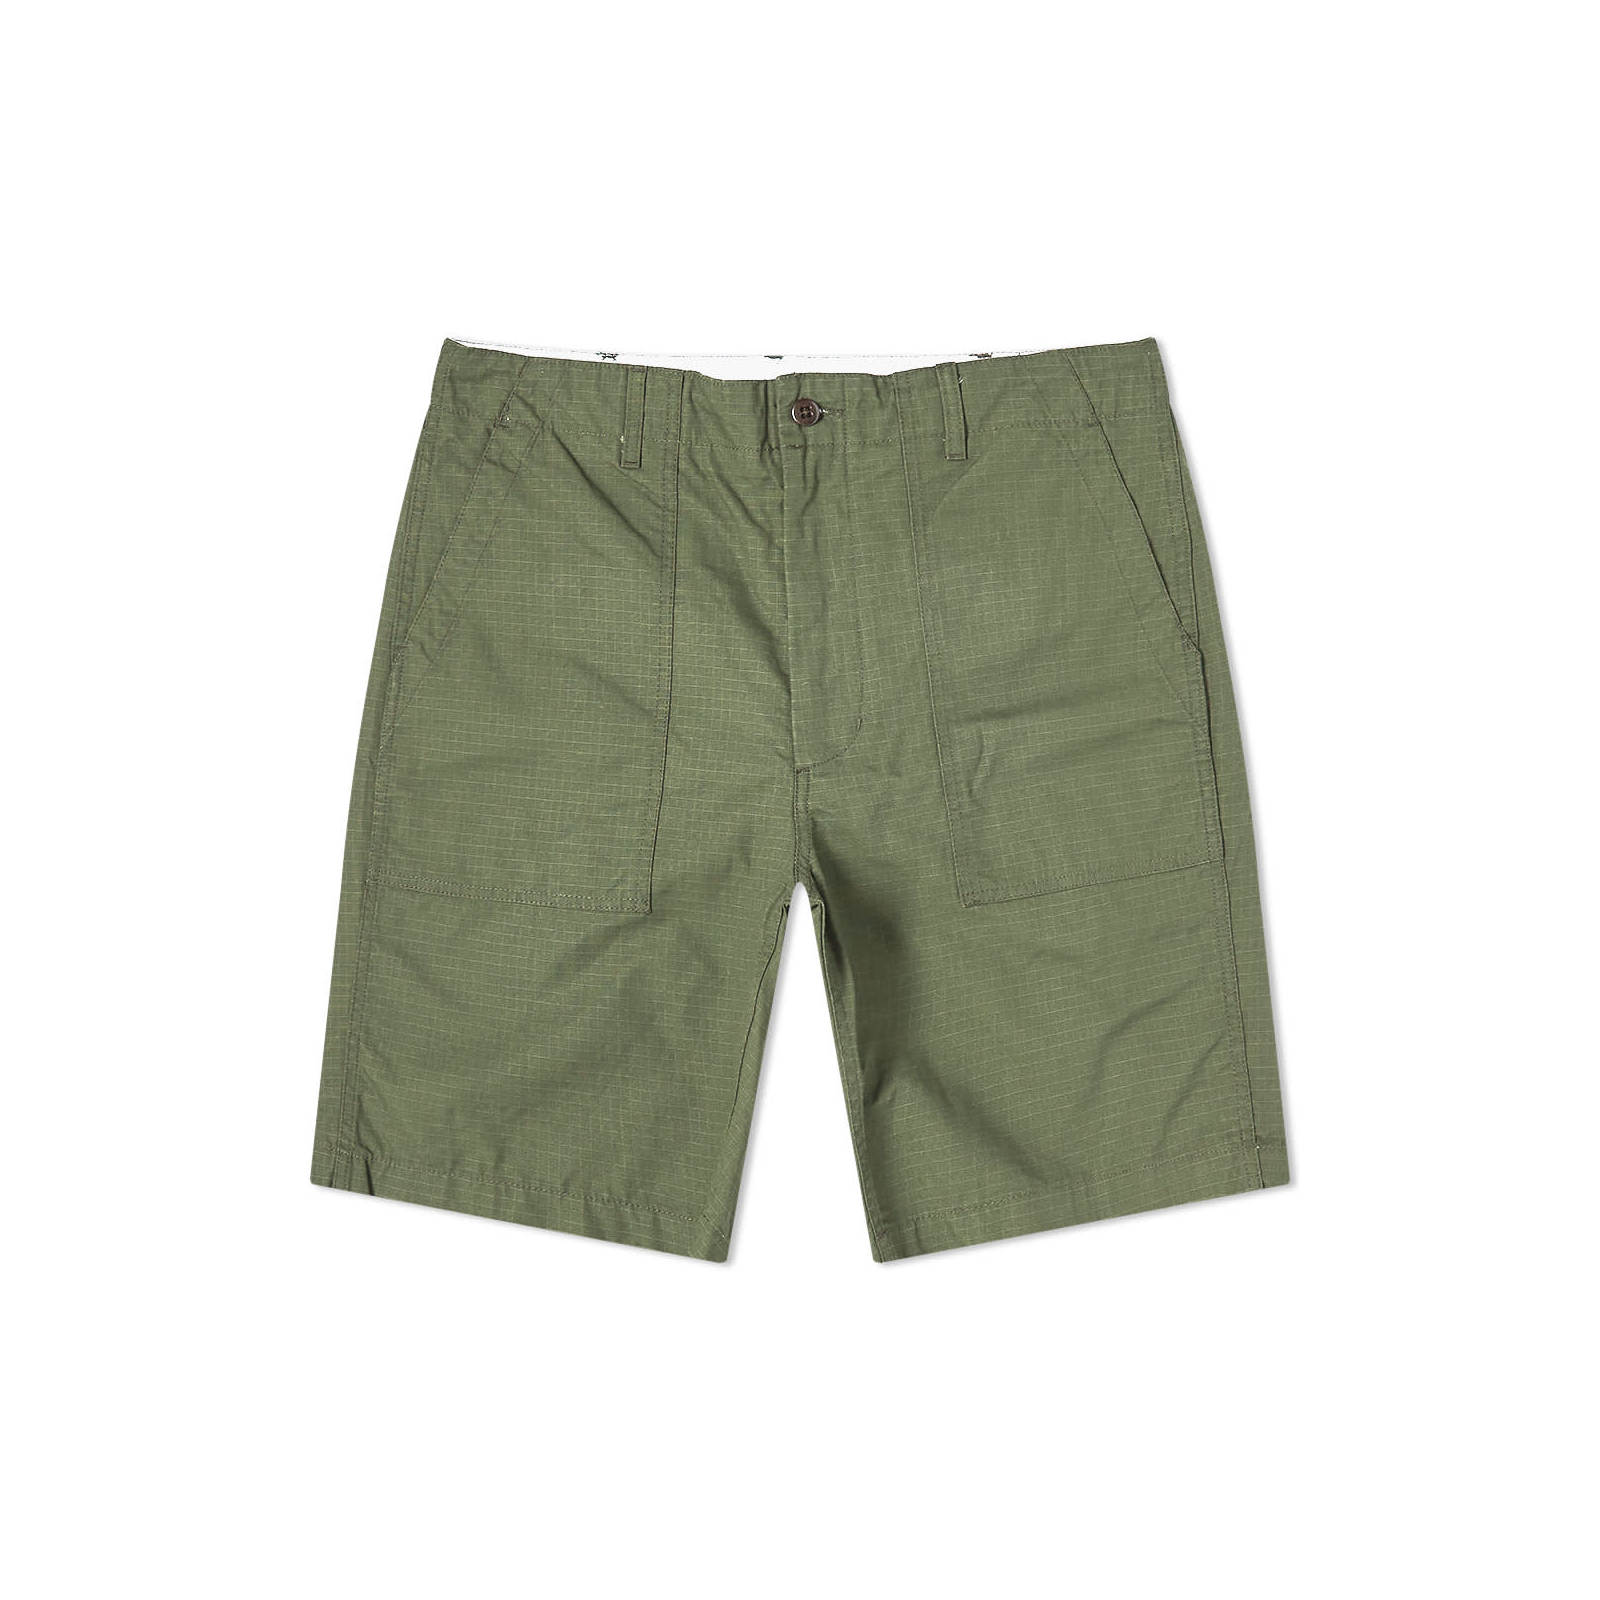 engineered-garments-ripstop-fatigue-short---olive---_20s1e003-ct010_1_sm